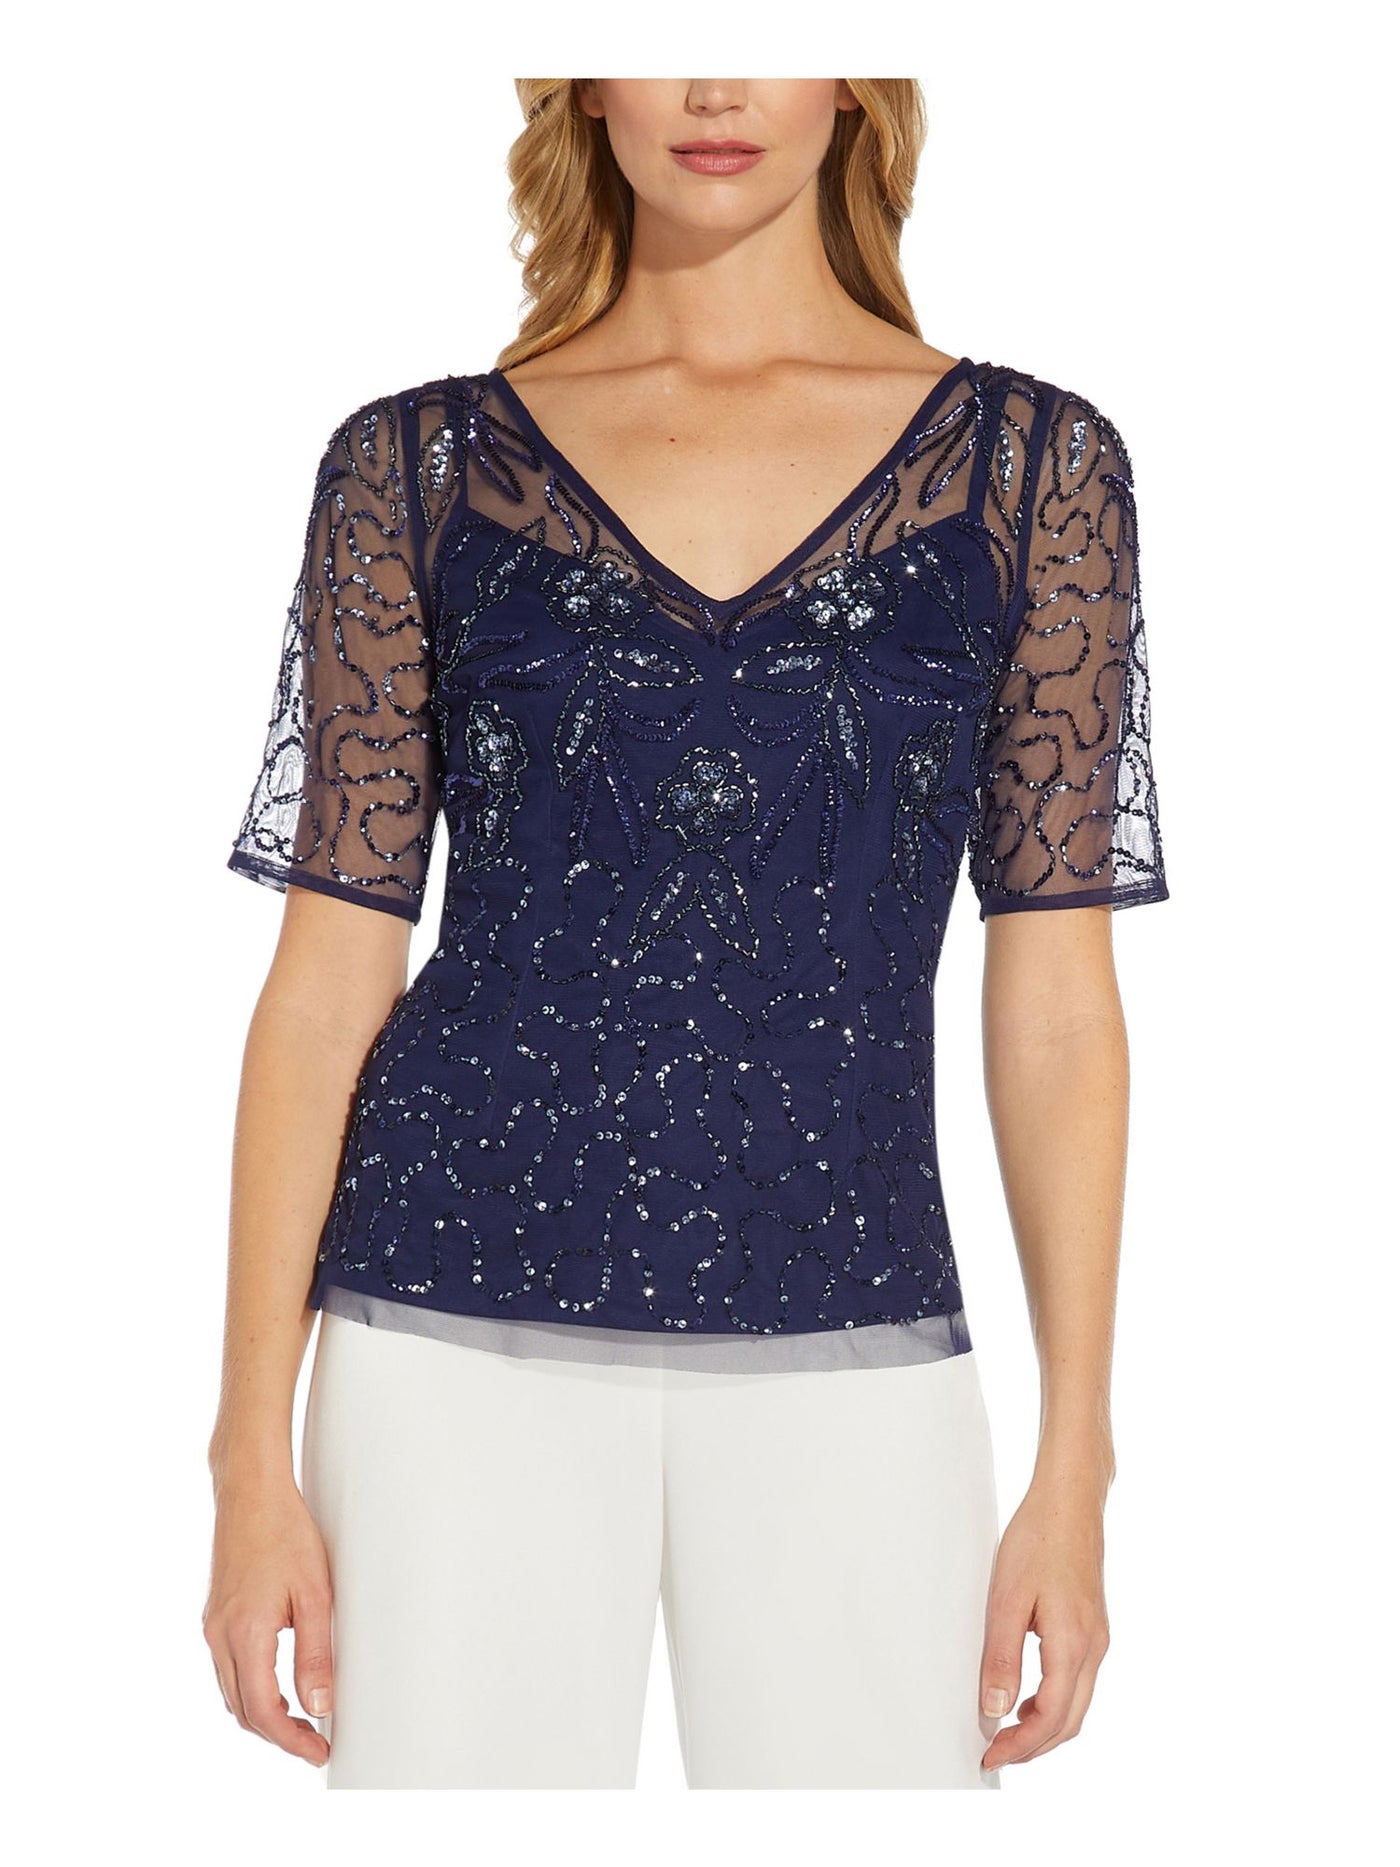 ADRIANNA PAPELL Womens Navy Sequined Beaded Sheer Short Sleeve V Neck Party Top 4